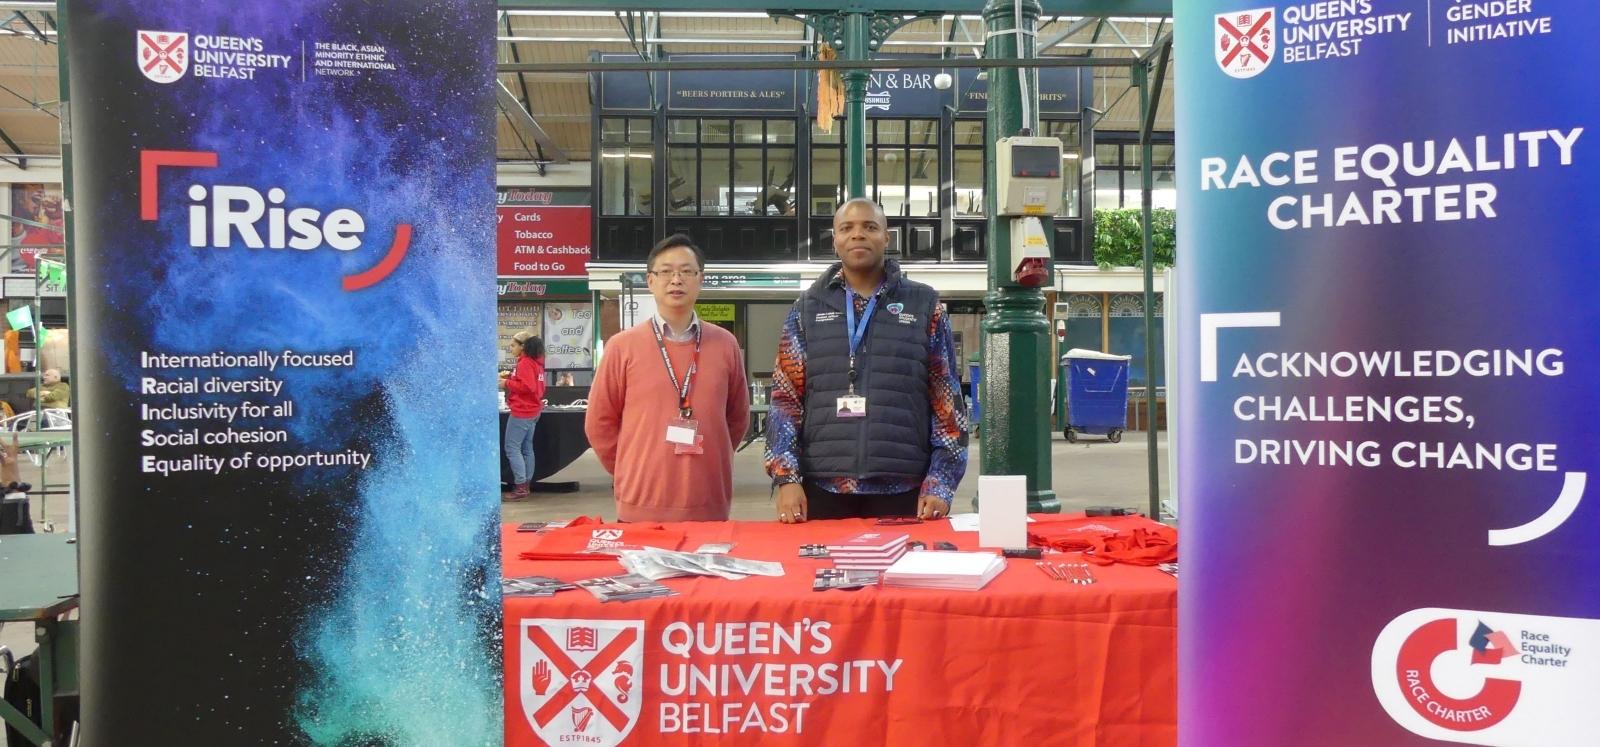 Dr  Liang Wang and Jamie-Lukas Campbell at the iRise-Racial Equality Charter stall at the Black History Month expo, St George's Market